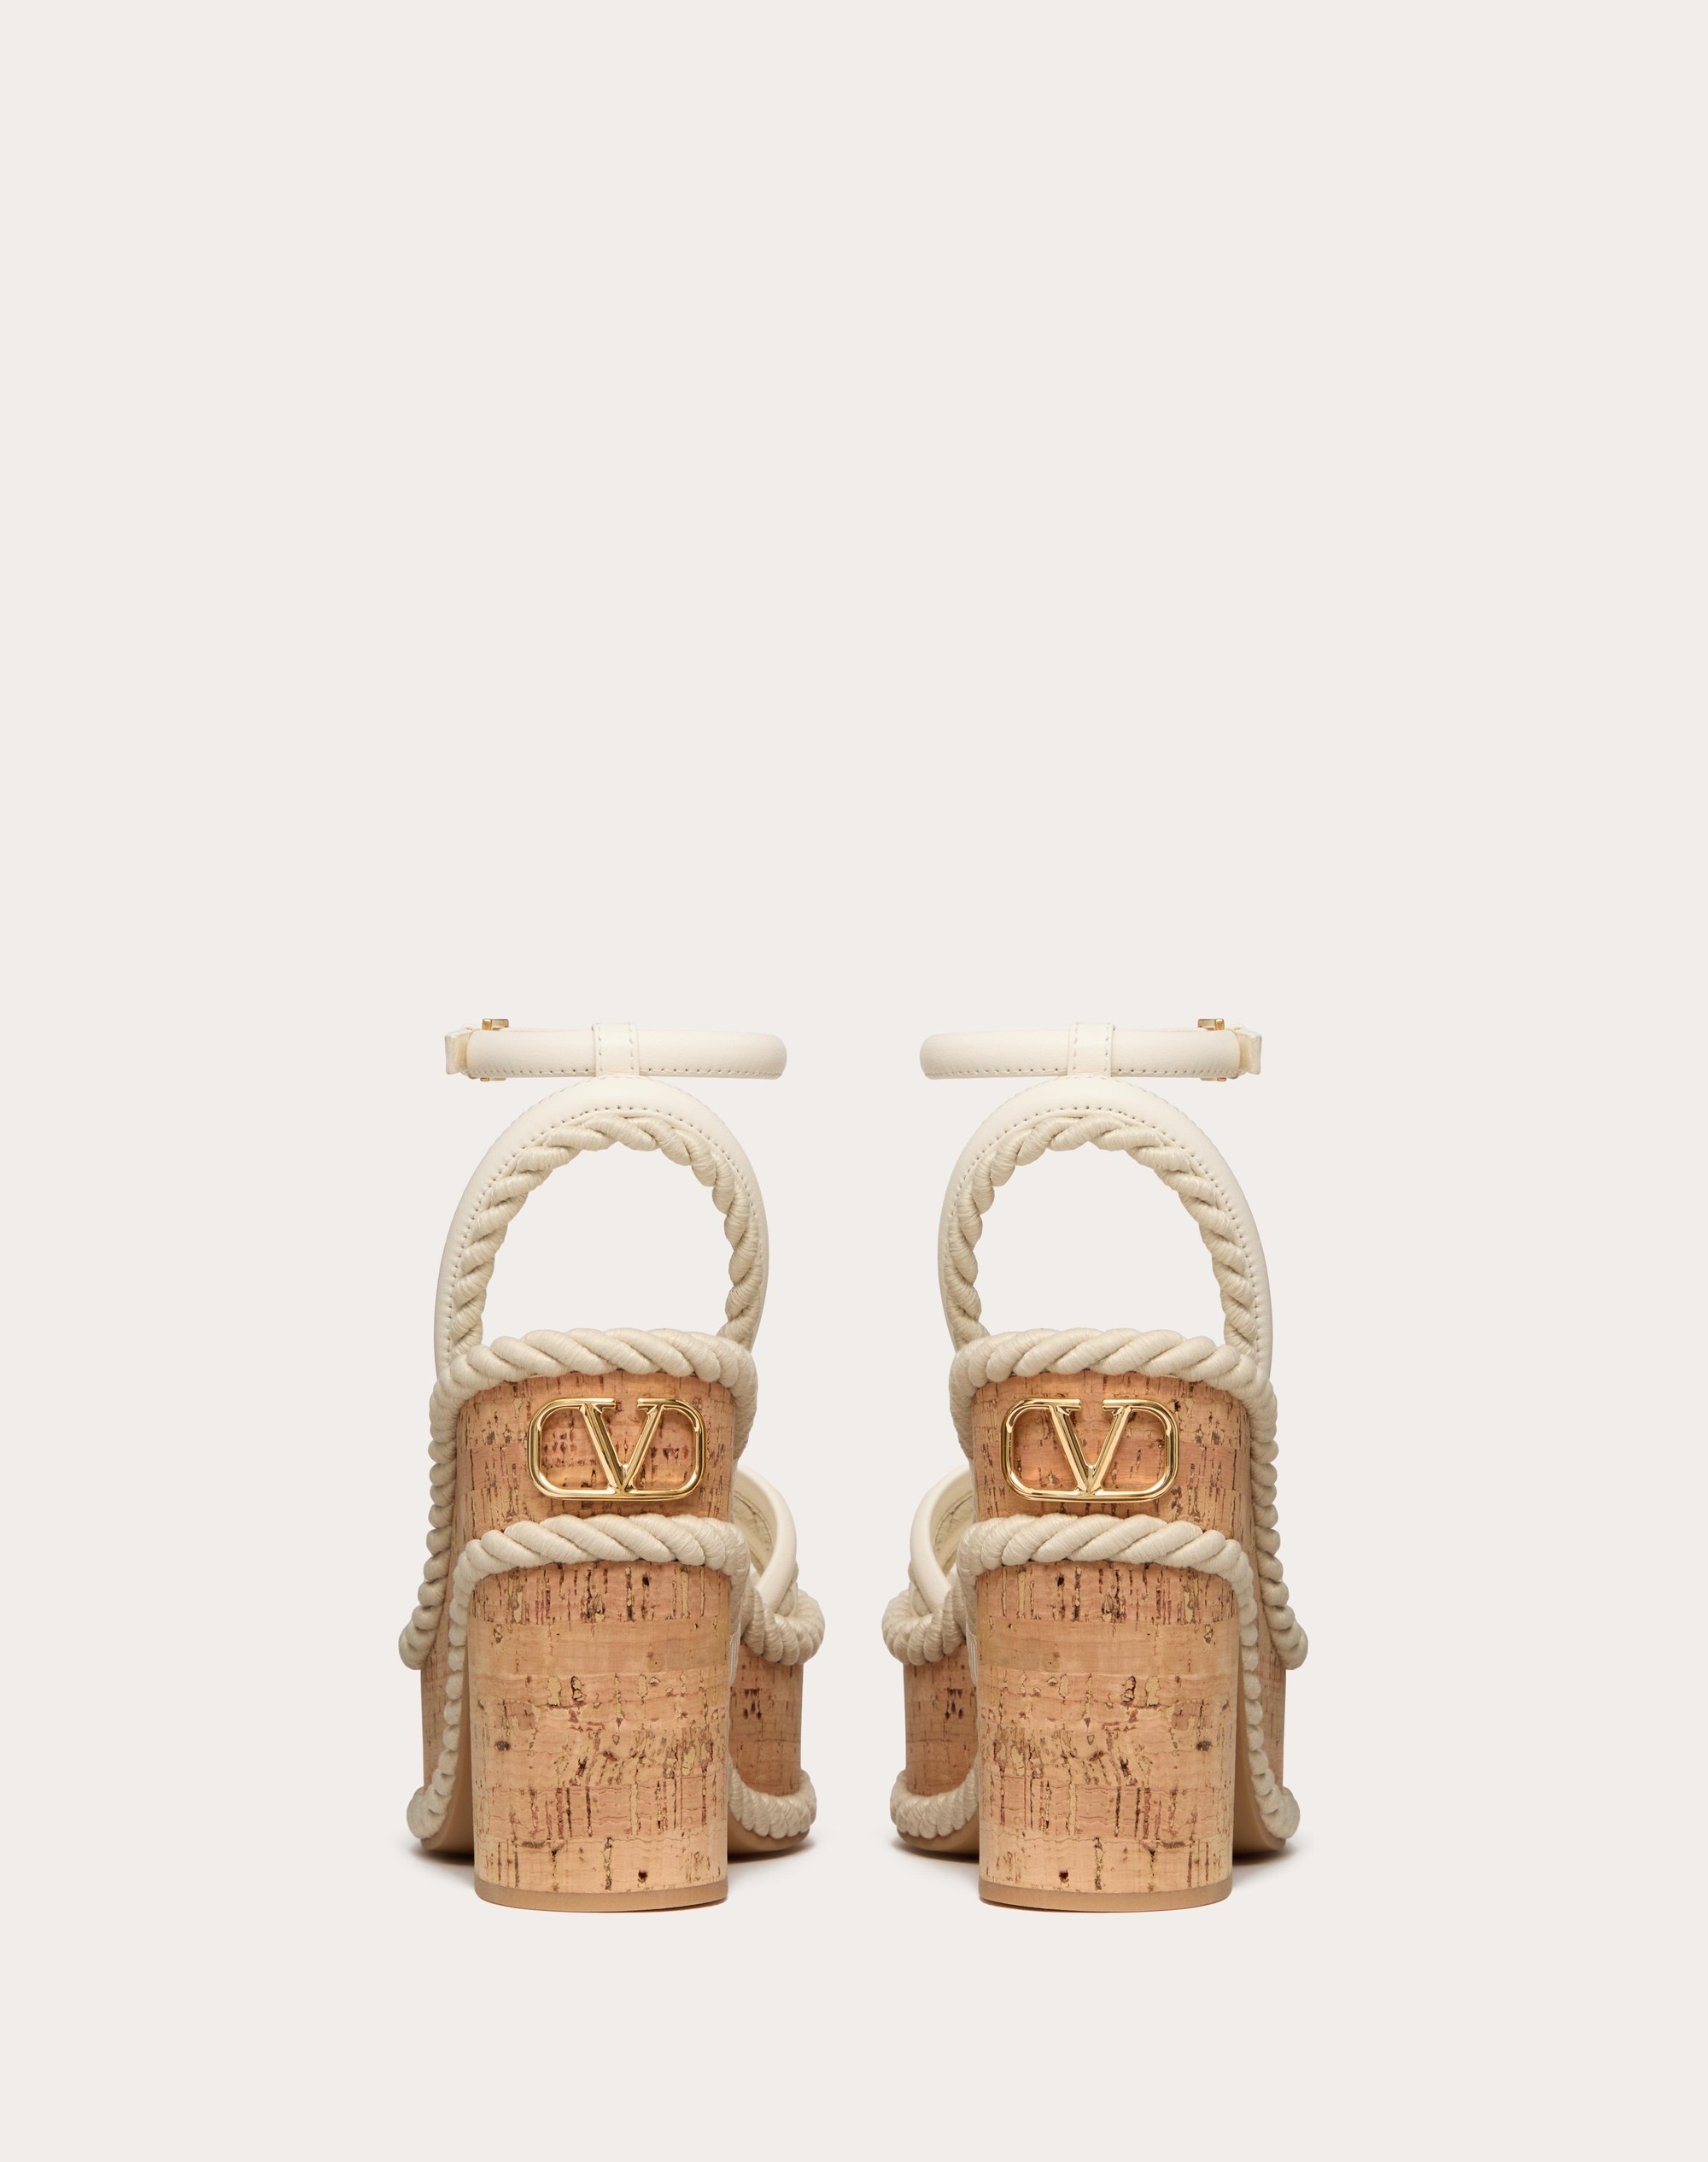 VLOGO SUMMERBLOCKS WEDGE SANDAL IN NAPPA LEATHER AND ROPE TORCHON 130MM - 3